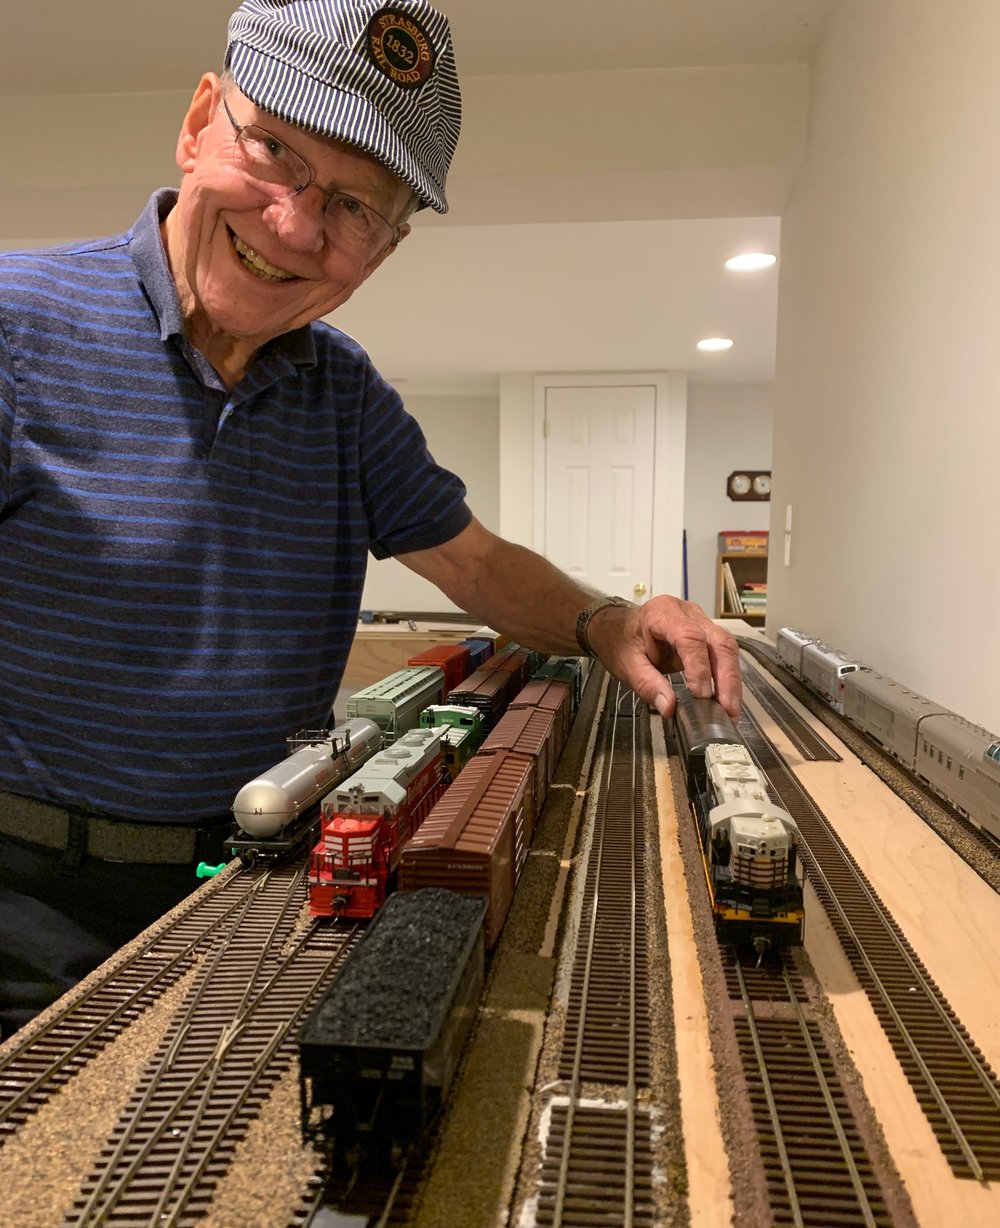 My father-in-law's trains. 